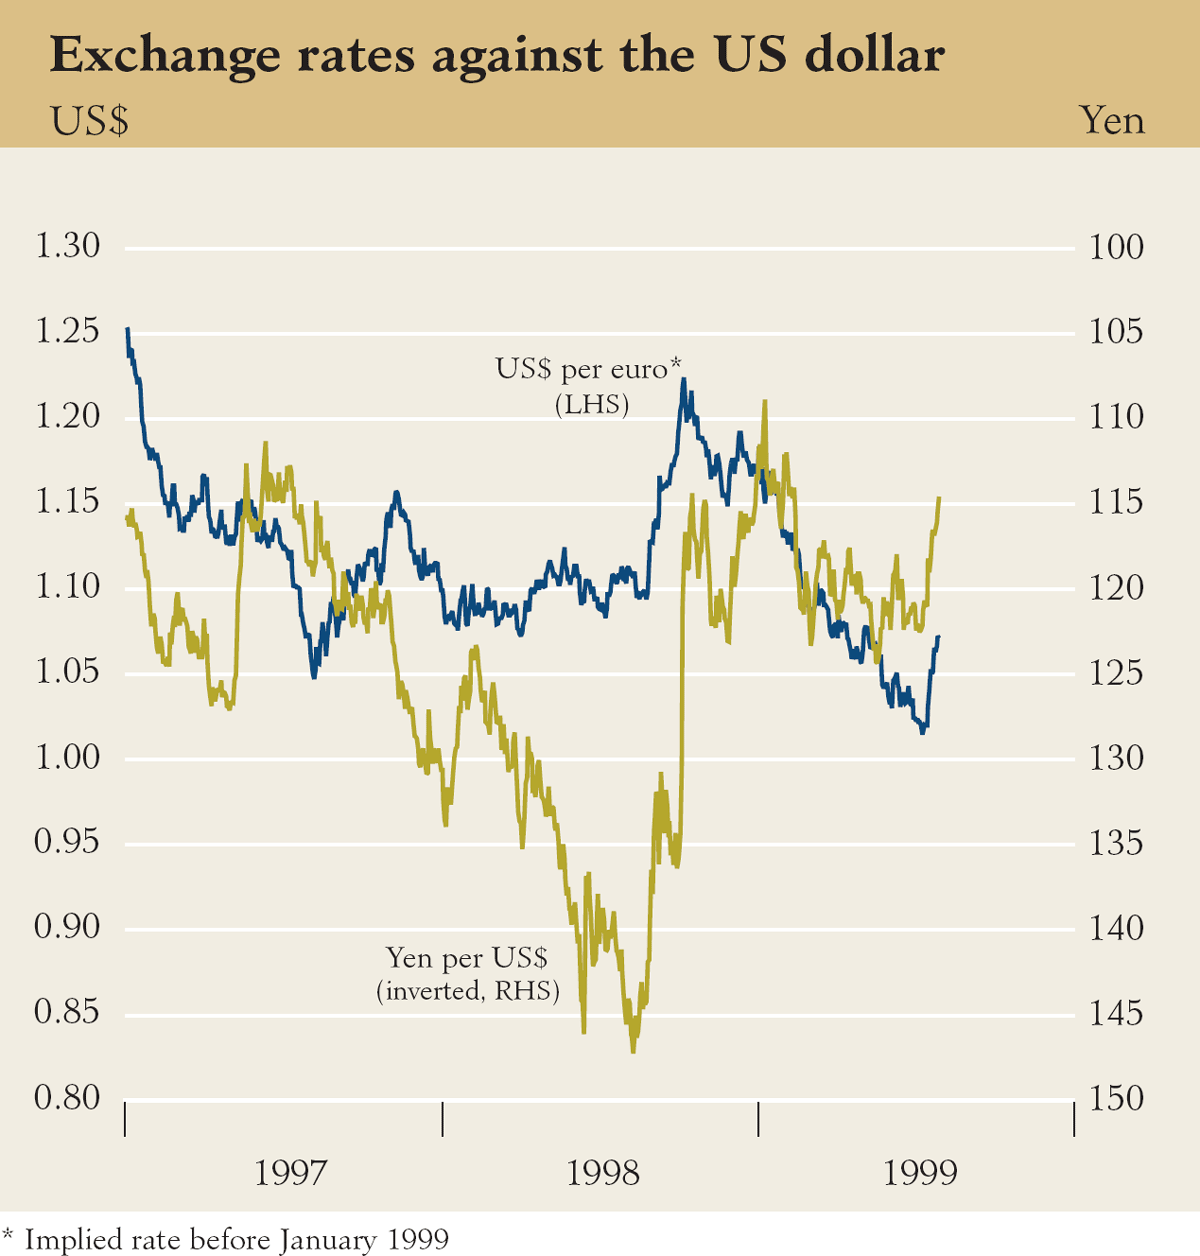 Graph showing Exchange rates against the US dollar